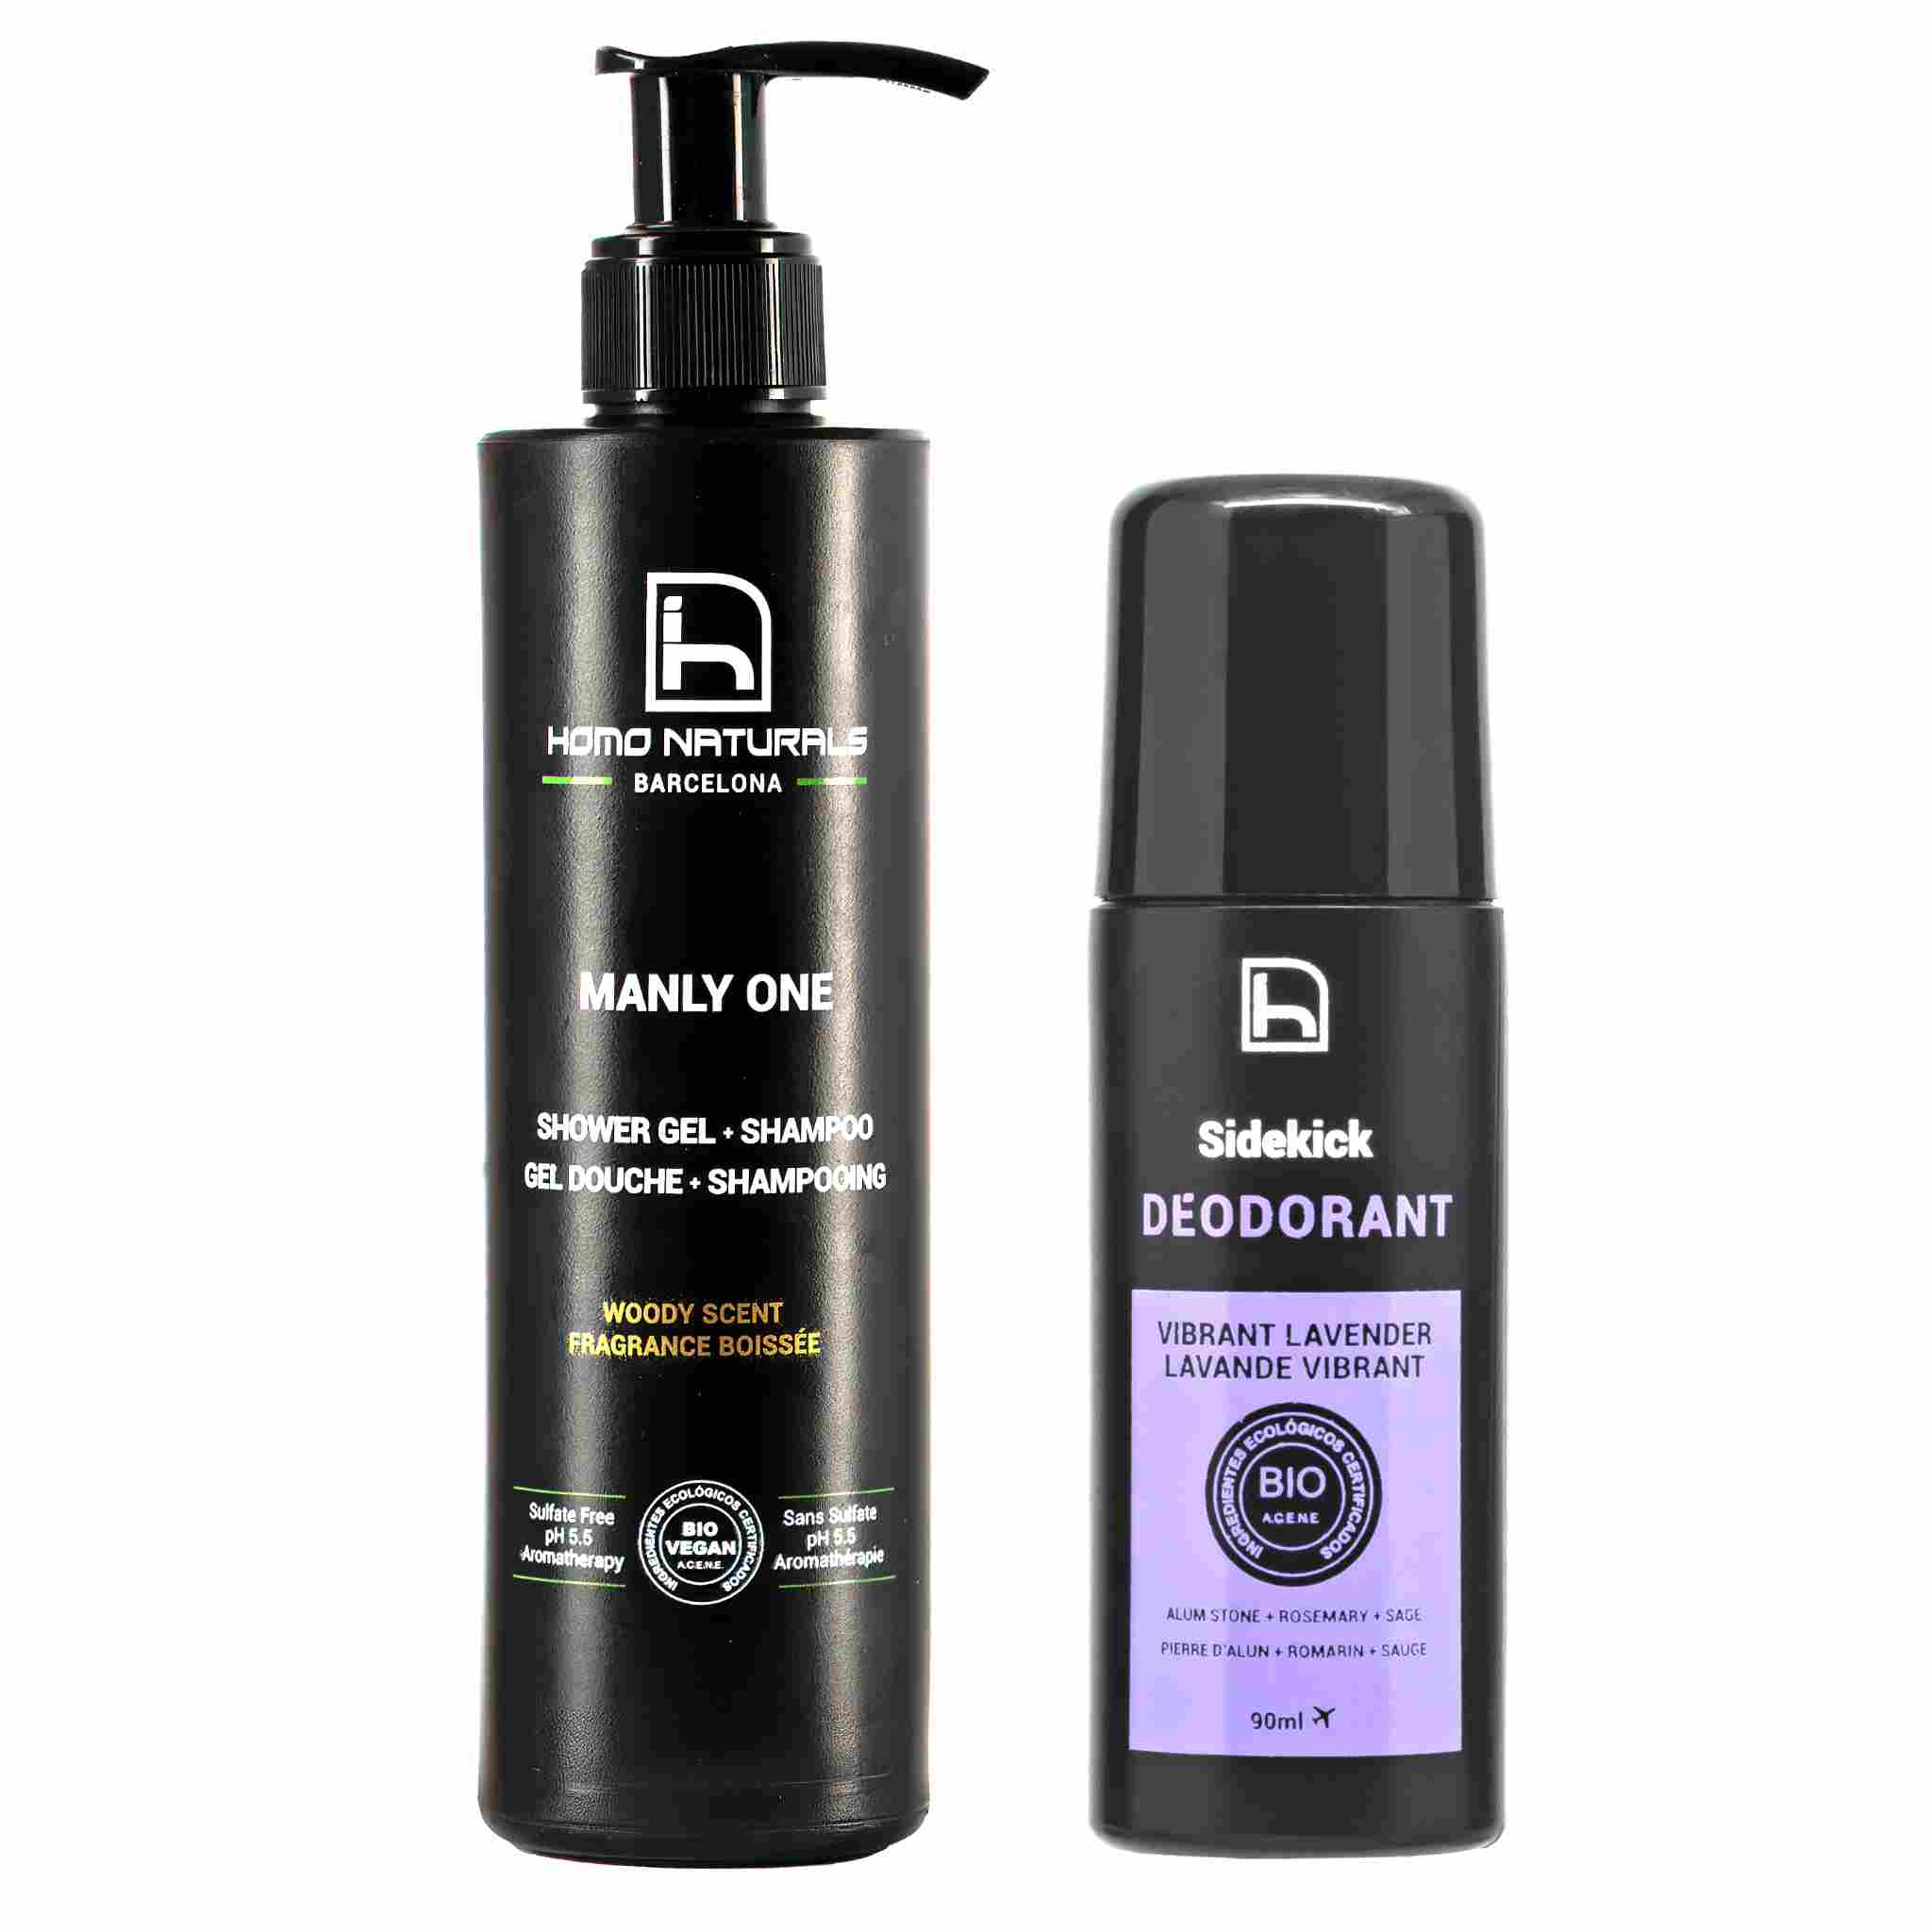 Ecological roll-on deodorant and shower gel for men